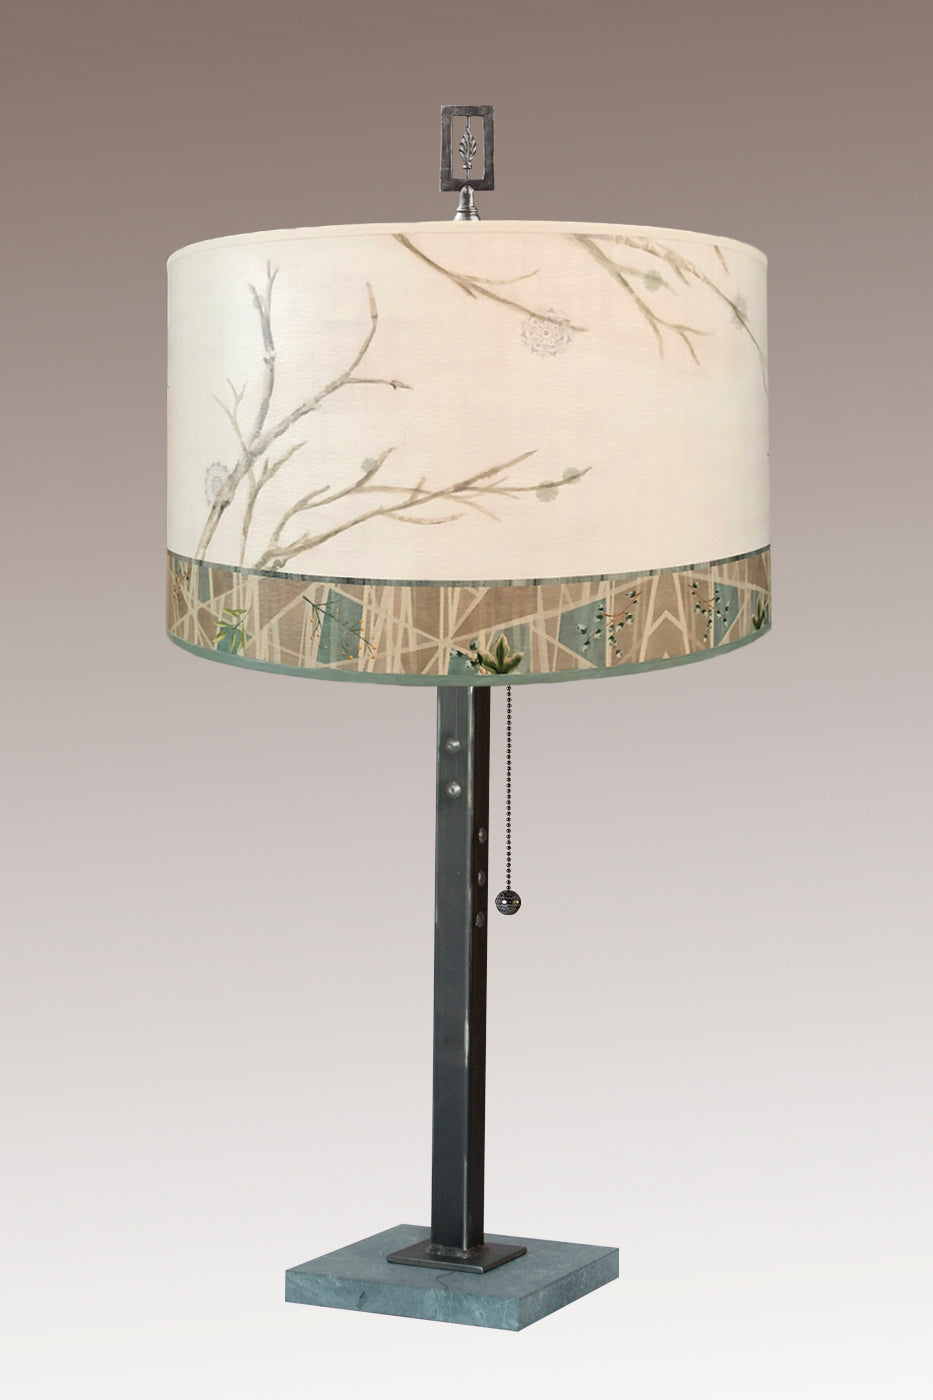 Janna Ugone & Co Table Lamps Steel Table Lamp with Large Drum Shade in Prism Branch